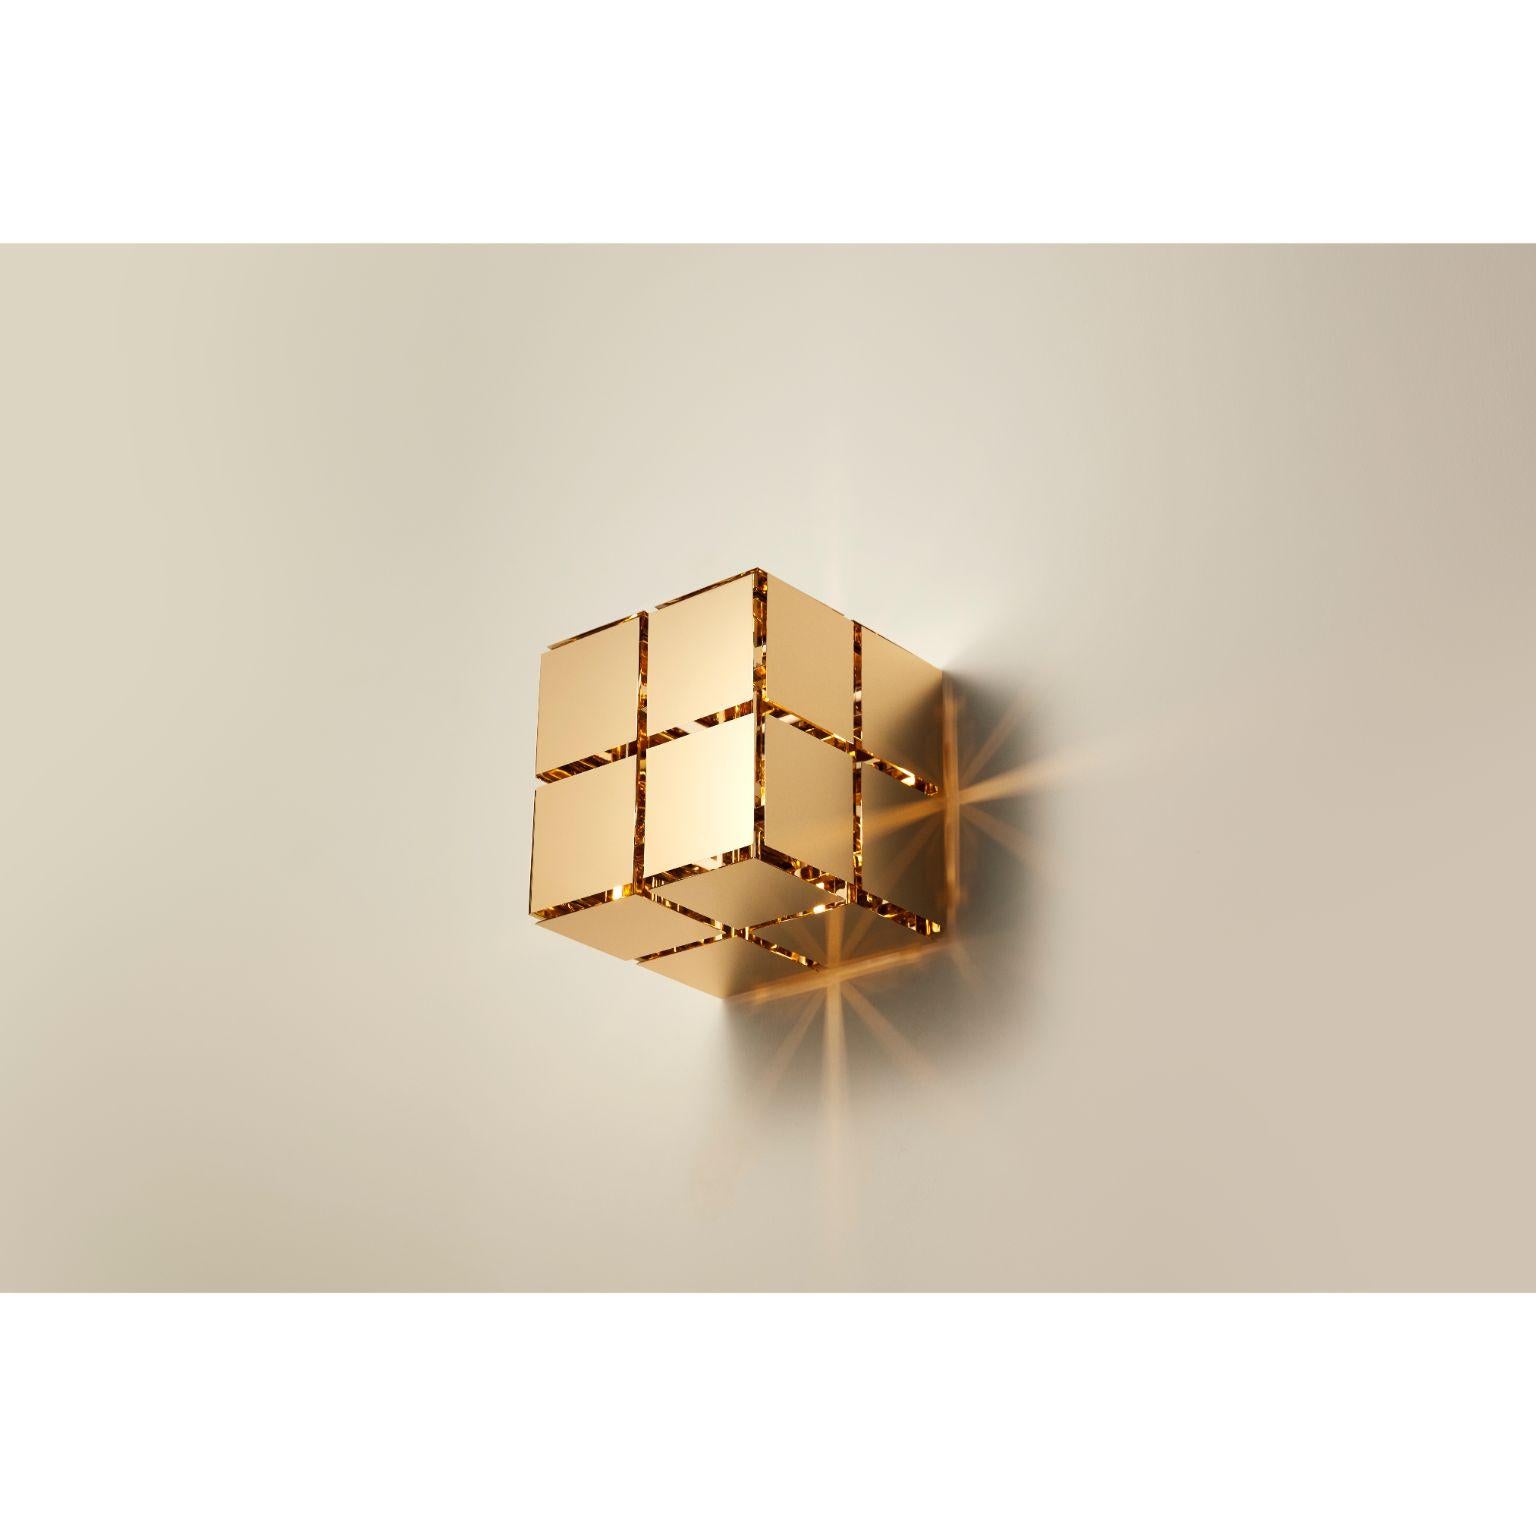 Cube wall lamp by Mydriaz
Dimensions: L 18 x W 18 x H 18 cm
Materials: Brass
Finishes: Golden-plated polished brass, white nickel finish on polished brass, black nickel finish on
polished brass

All our lamps can be wired according to each